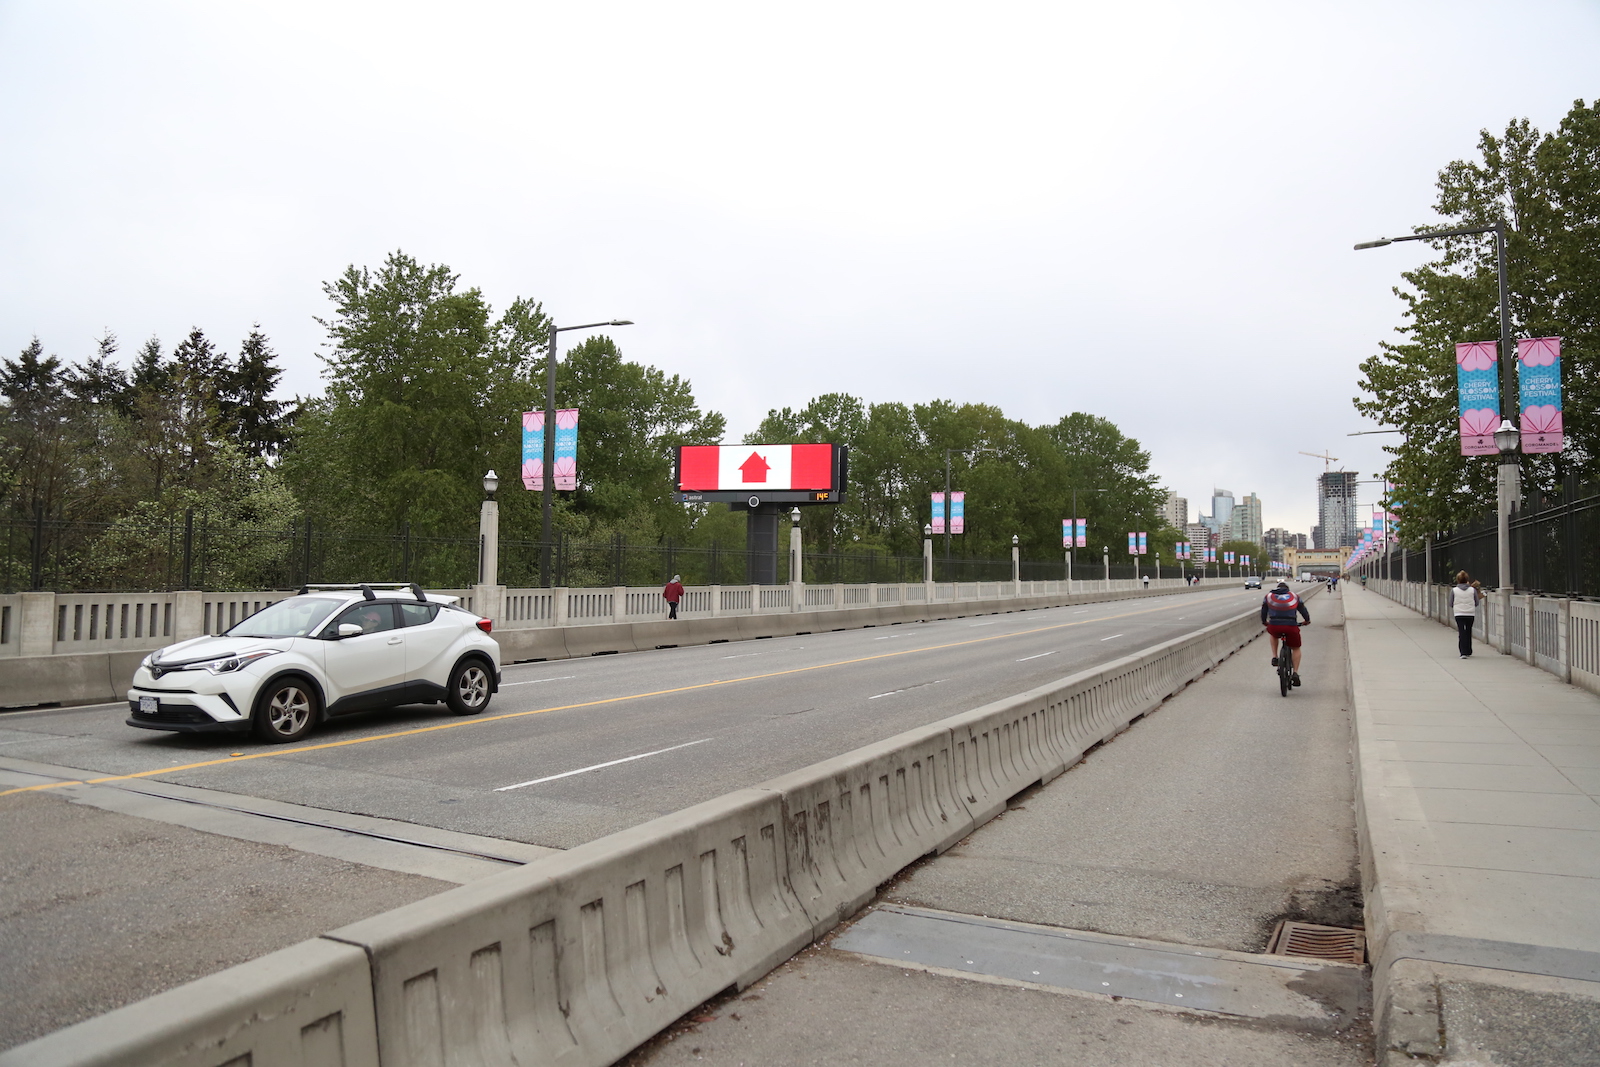 a single white car zooms on the other side of a protected bike lane with one rider. A billboard with an adaptation of the Canadian flag glows on the side of the road